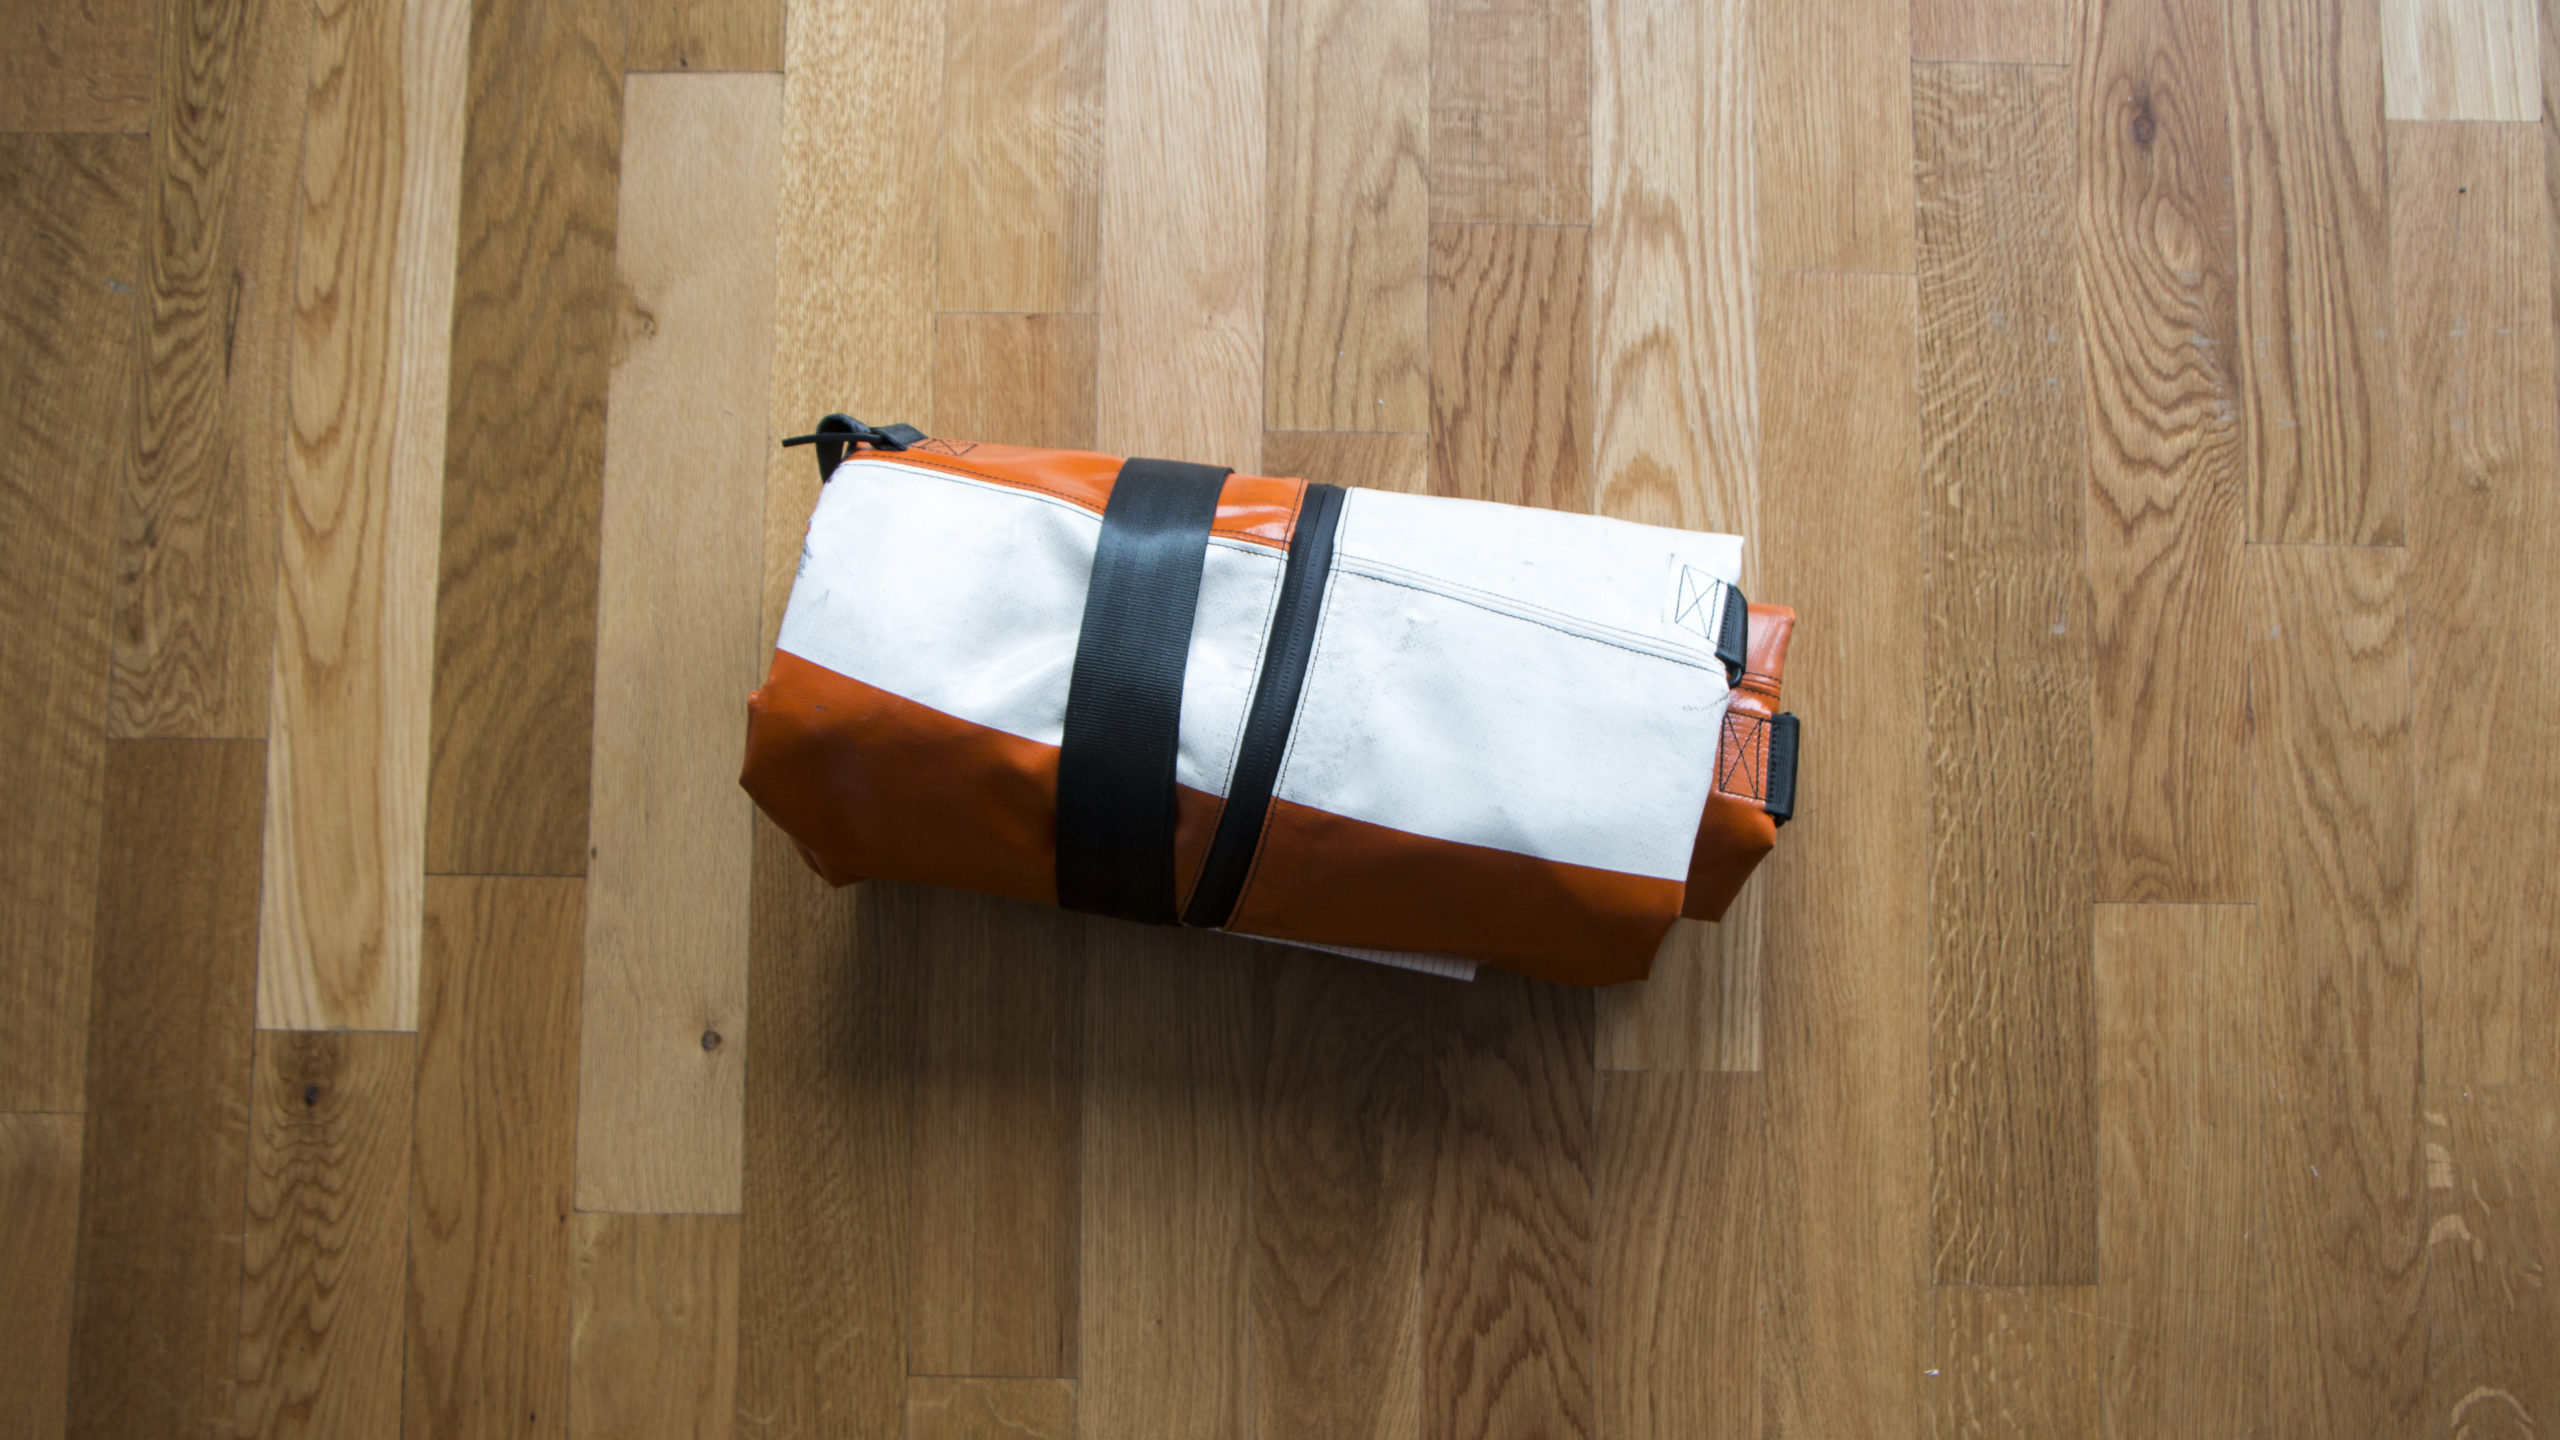 This Inflatable Suitcase Made Out Of Old Truck Tarps Works Surprisingly Well